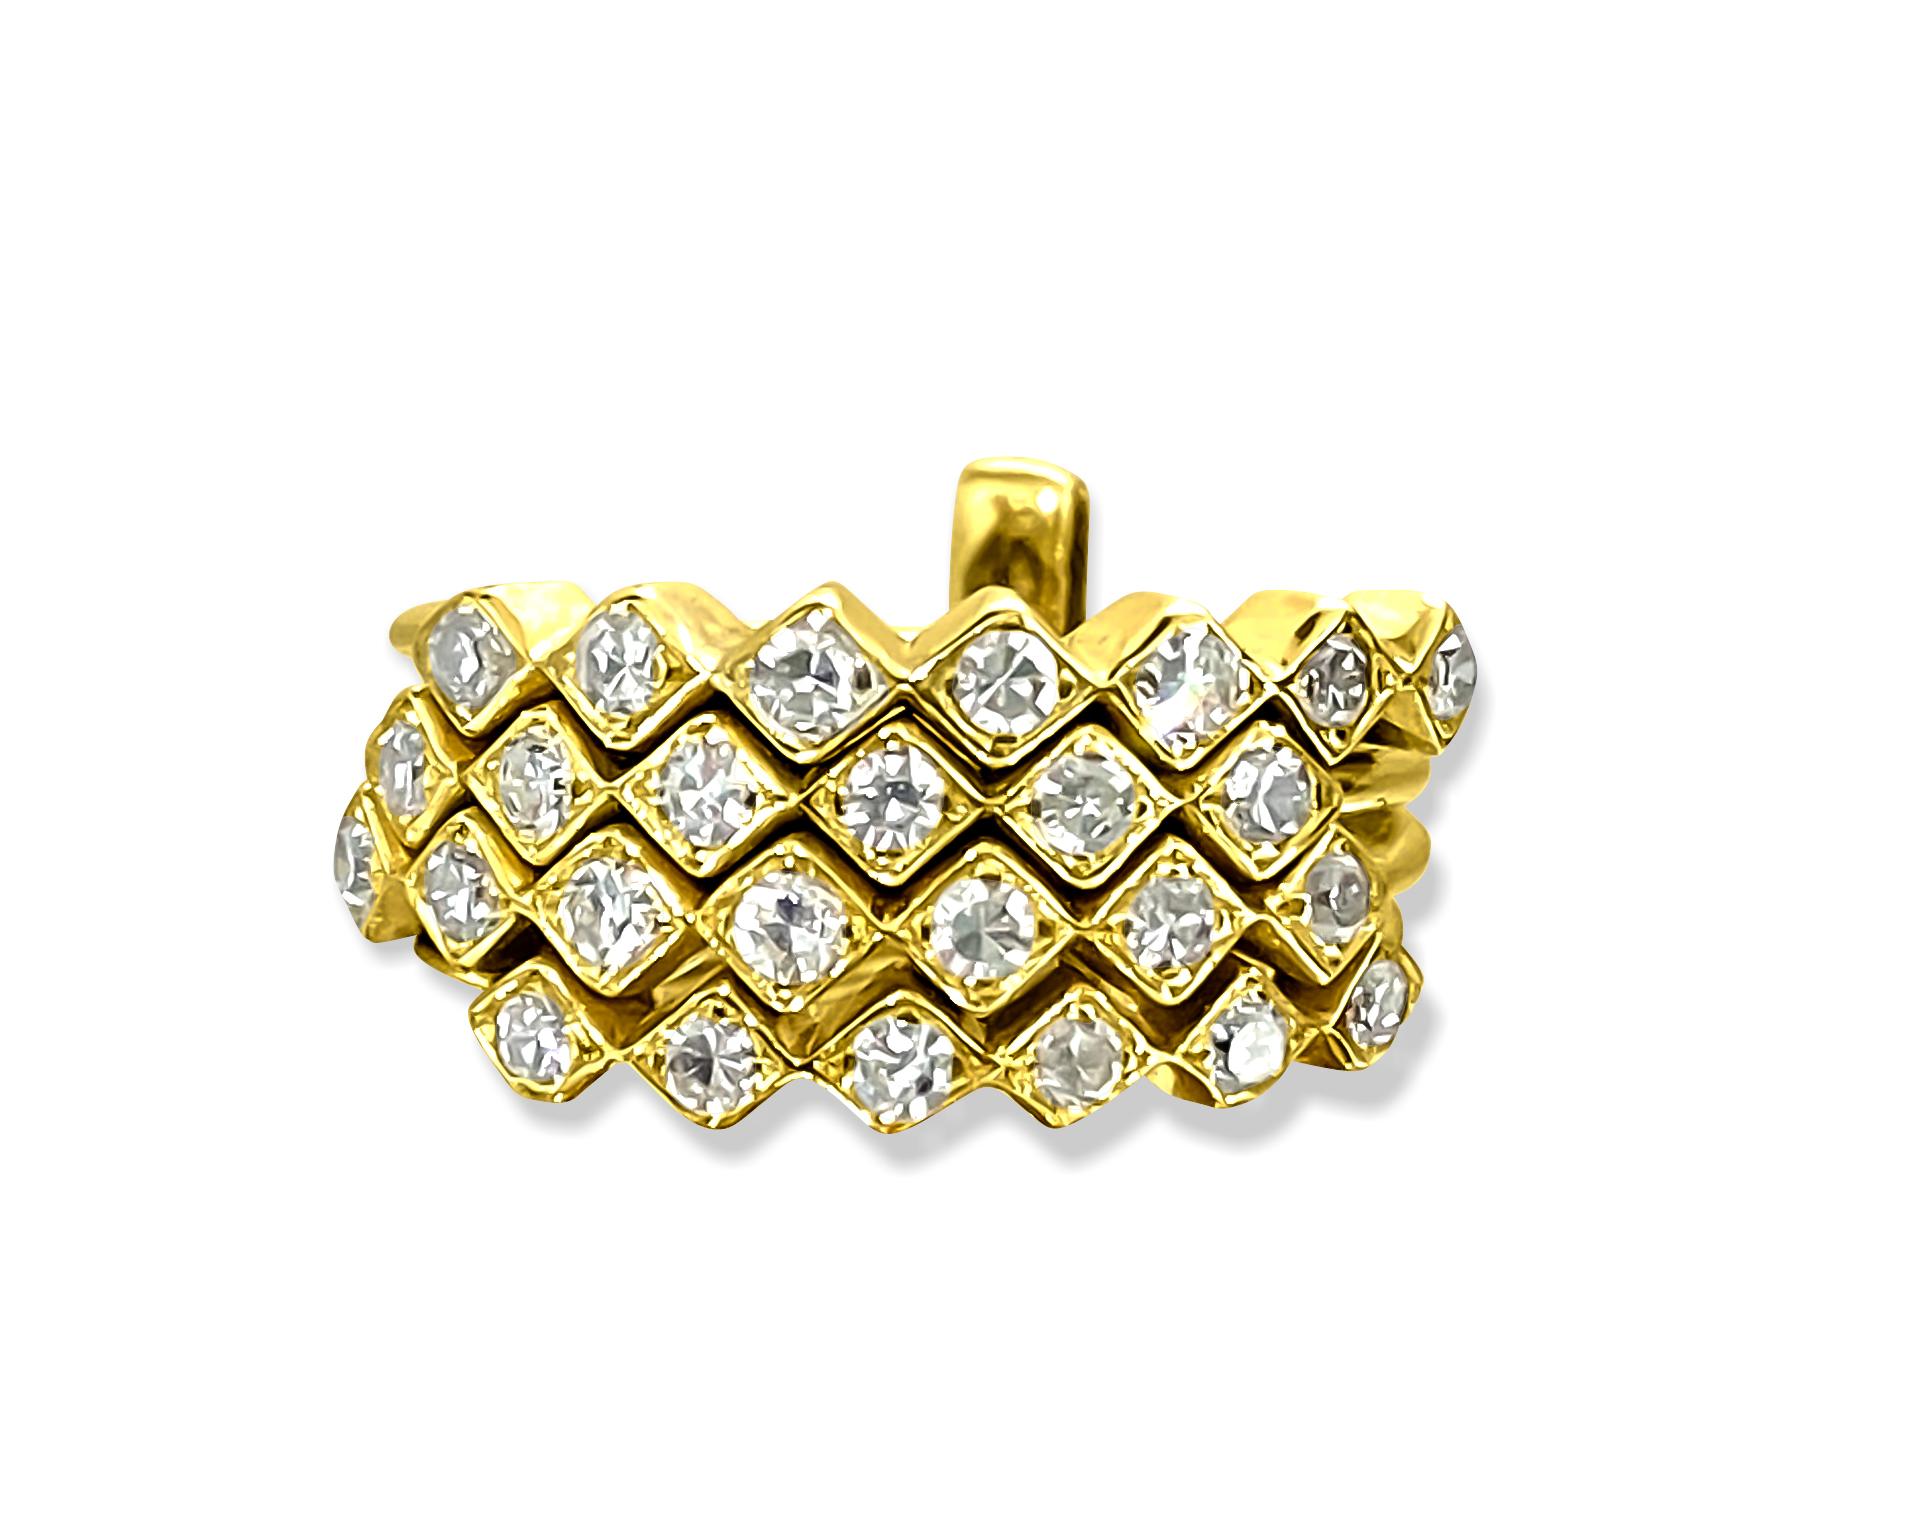 Vintage 1.00 Carat Diamond Stackable Ring in 14k Gold In Excellent Condition For Sale In Miami, FL